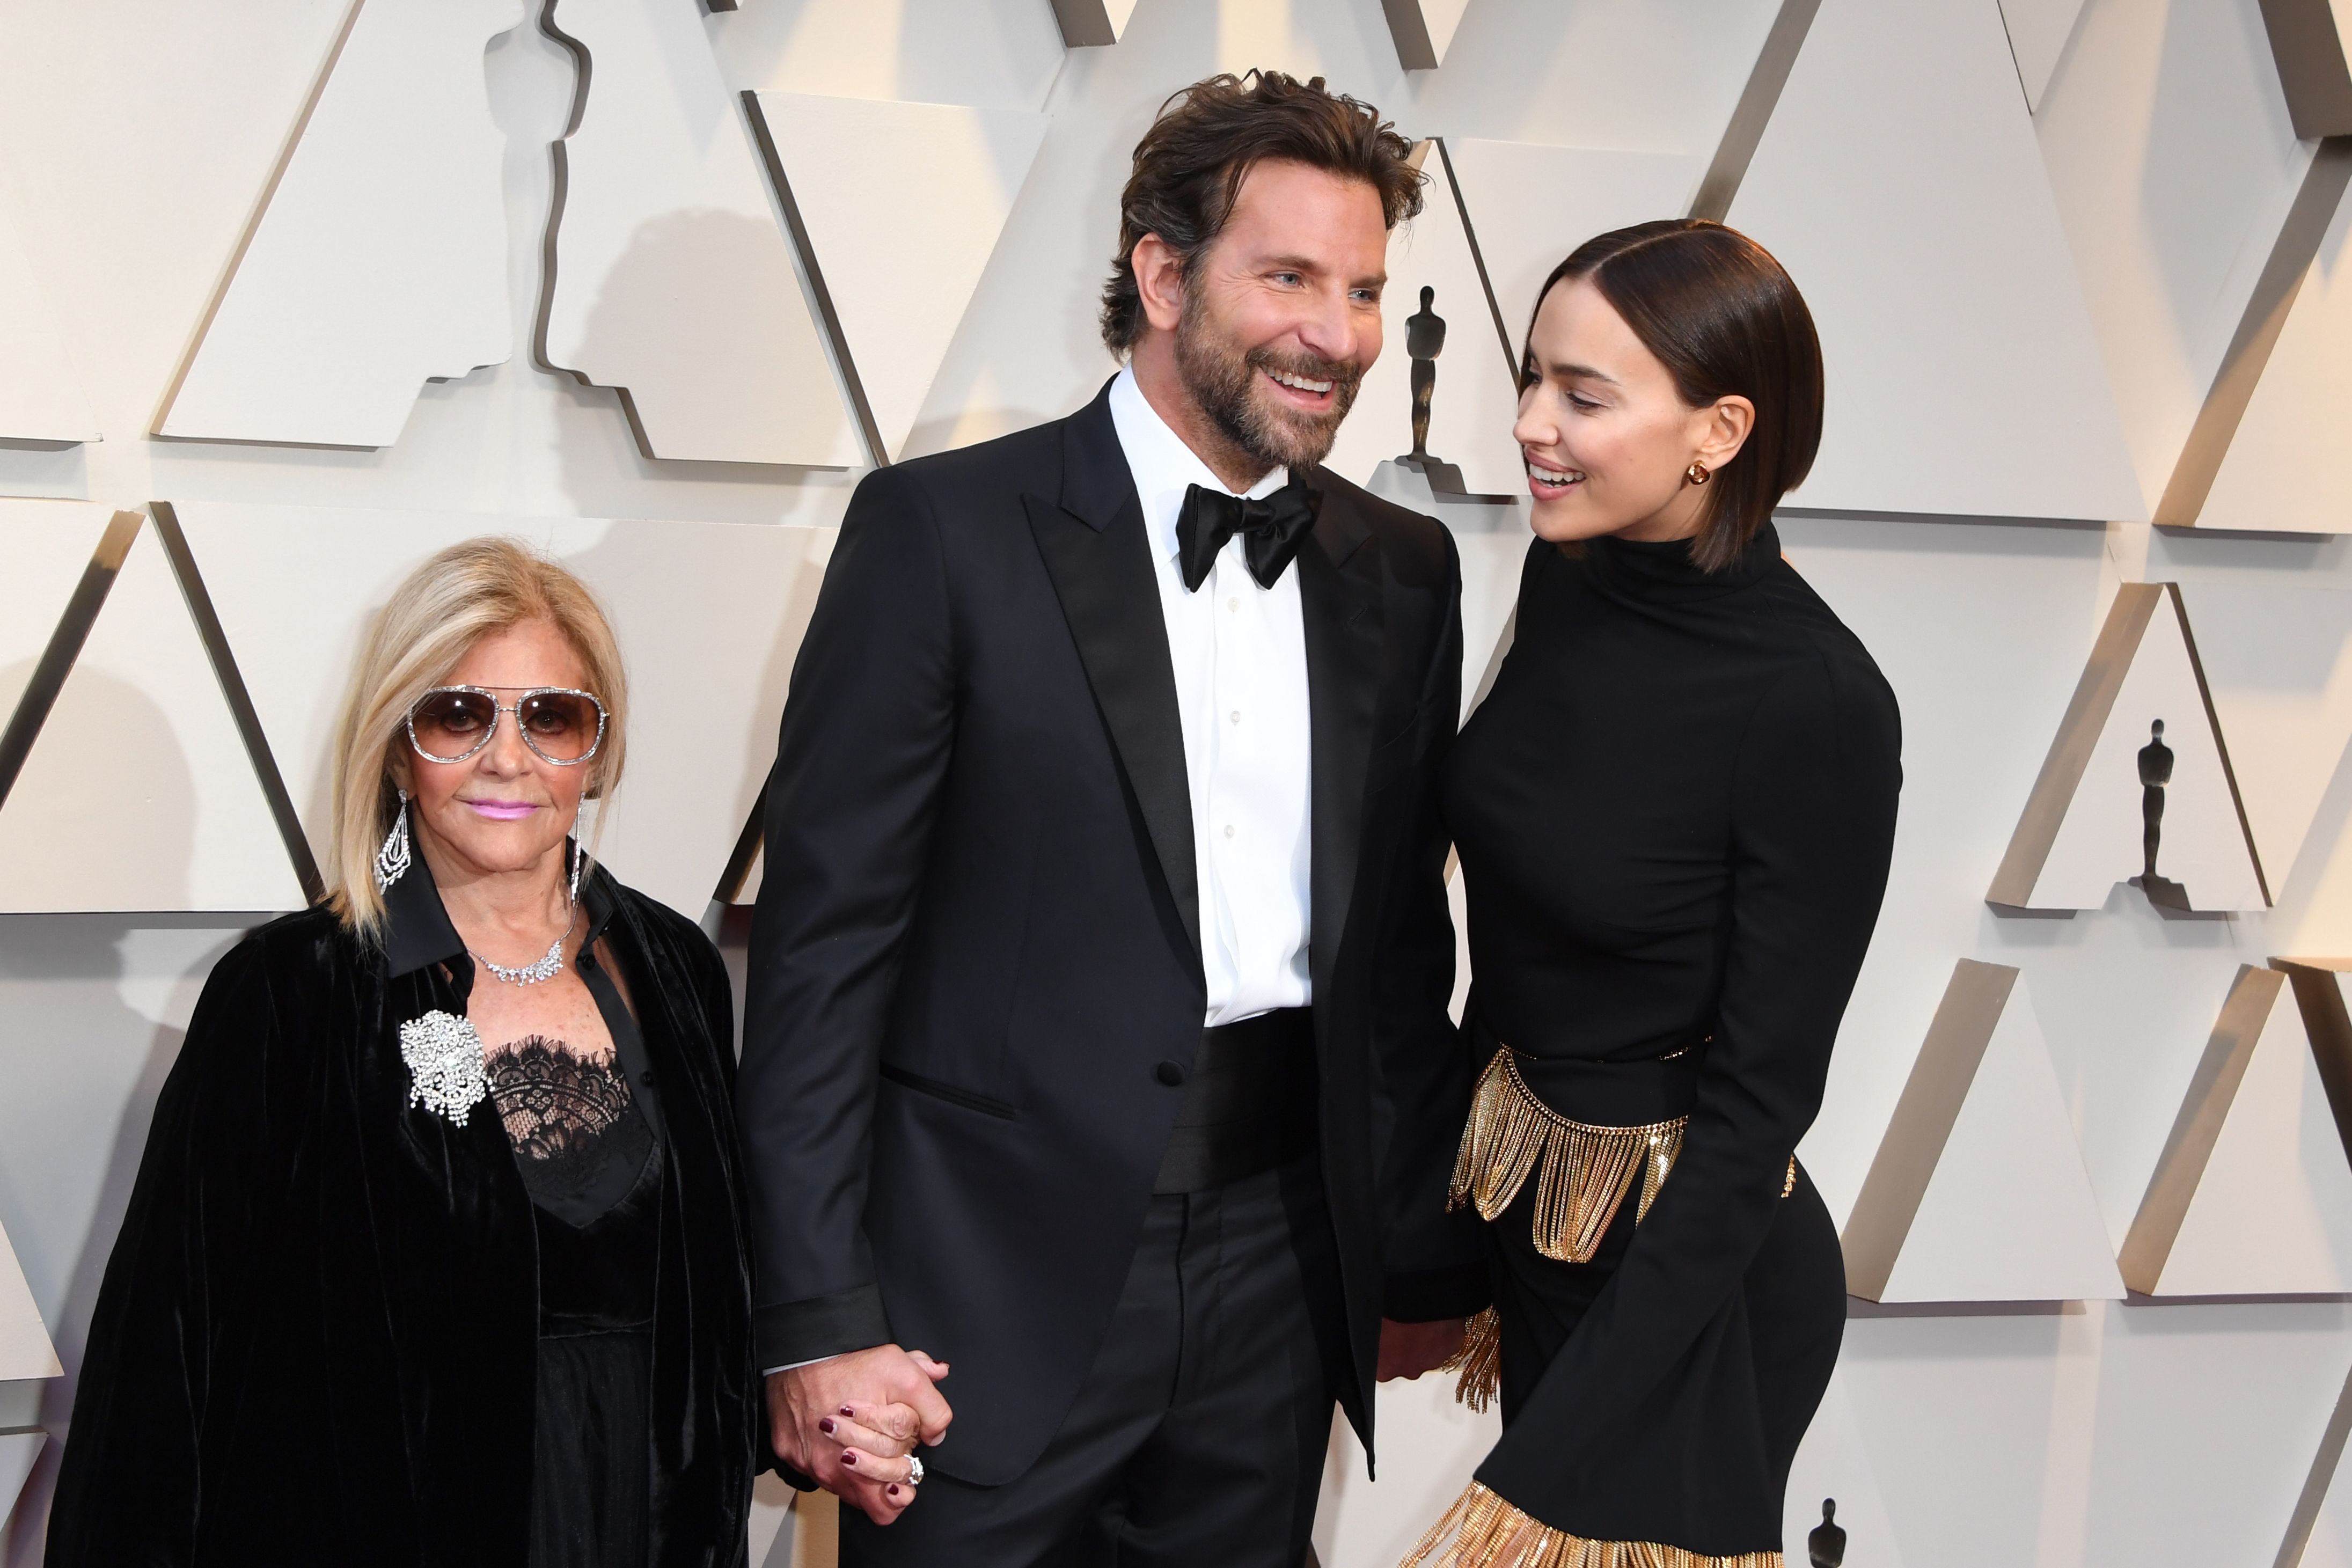 Bradley Cooper, Irina Shayk, and his mom Gloria Campano arrive for the 91st Annual Academy Awards at the Dolby Theatre in Hollywood, California, on February 24, 2019. | Source: Getty Images